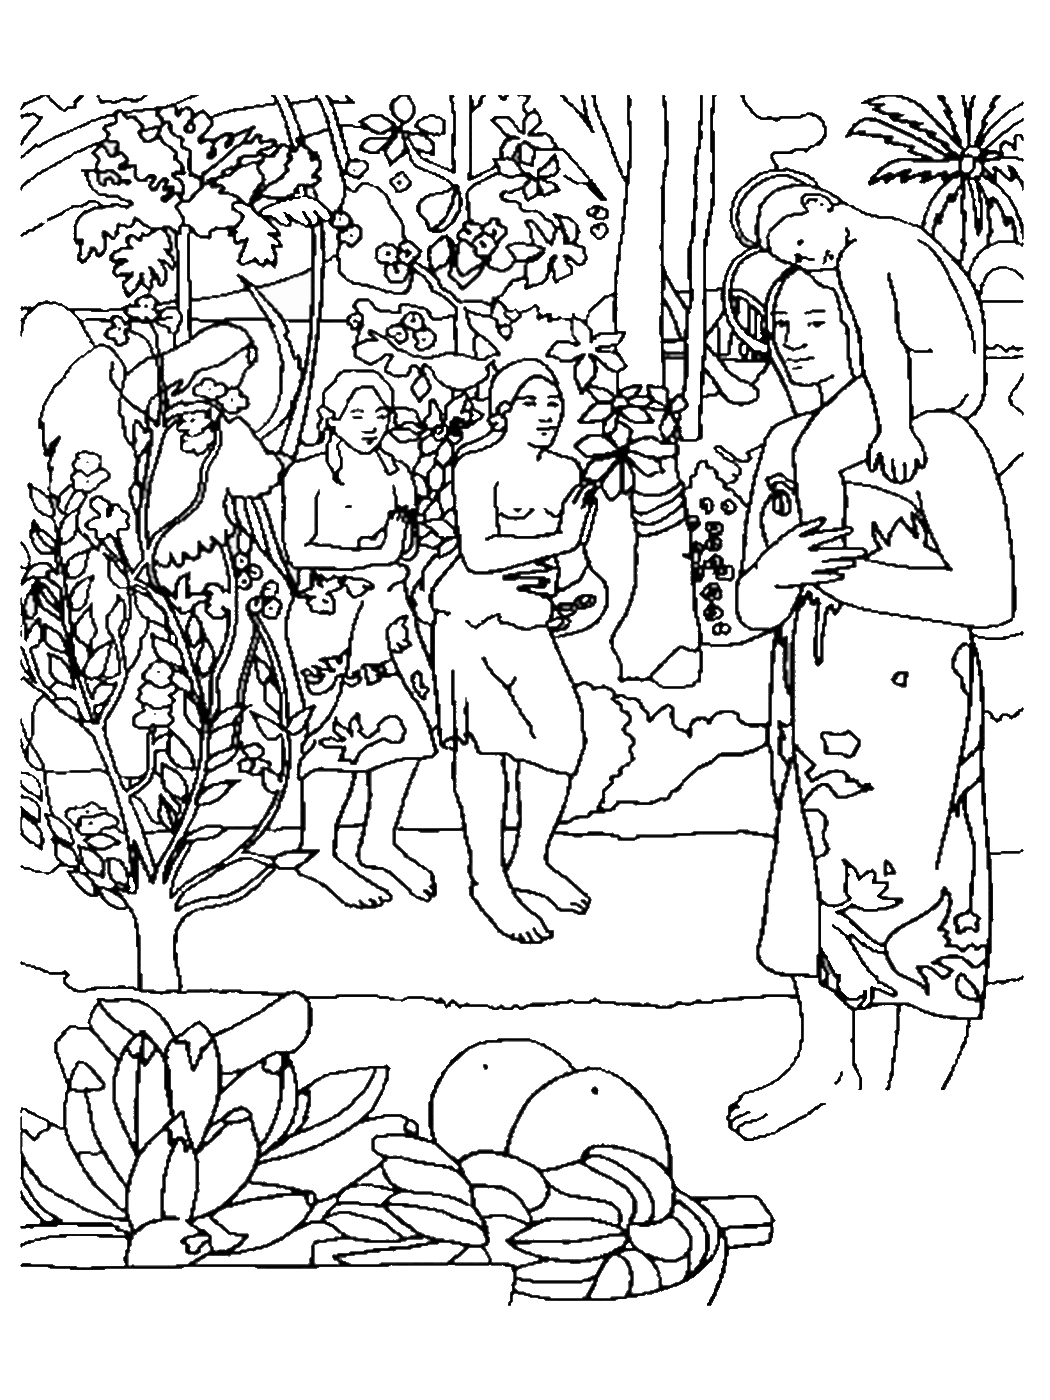 famous painting coloring pages famous paintings coloring pages page 1 famous painting pages coloring 